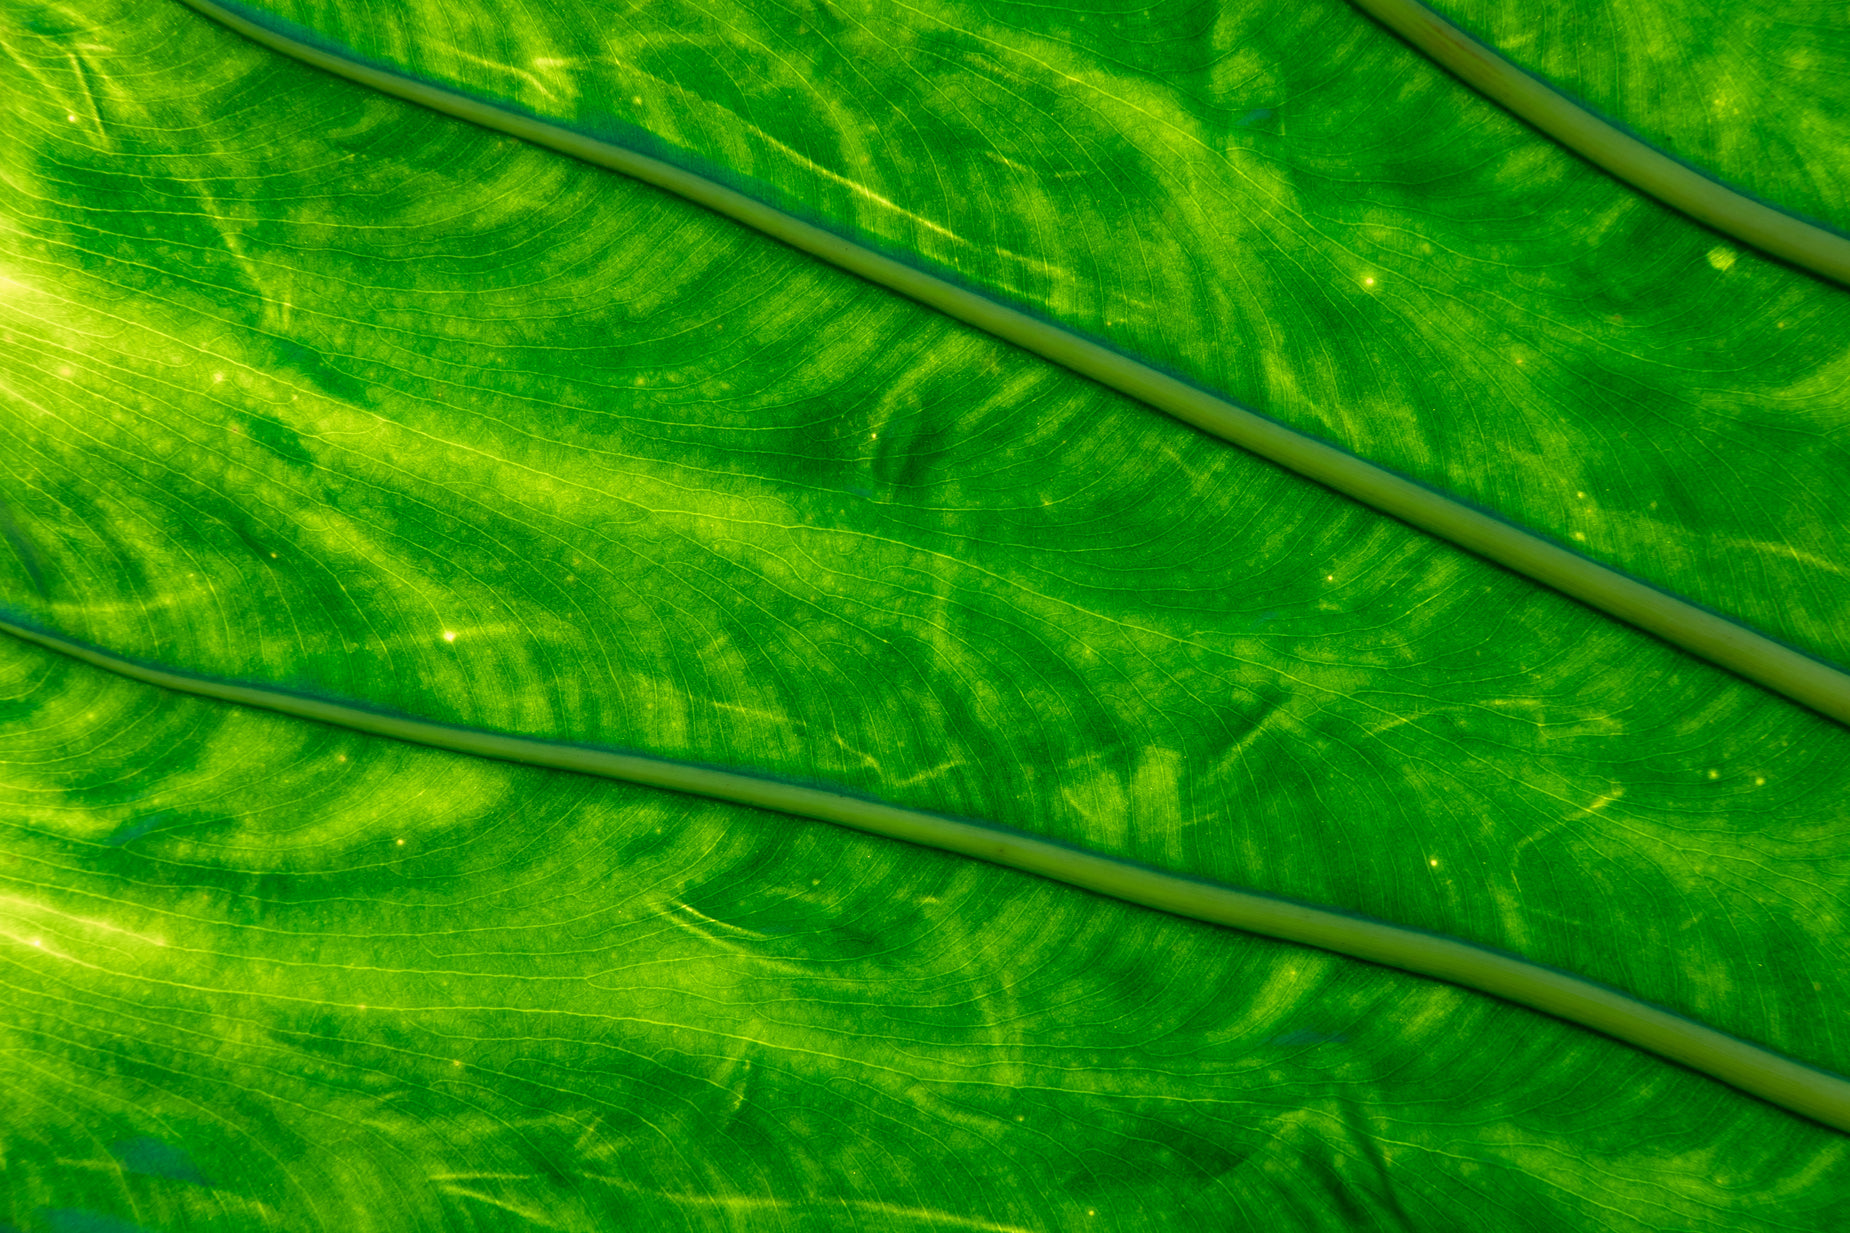 an abstract green leaf is shown as it looks like a po